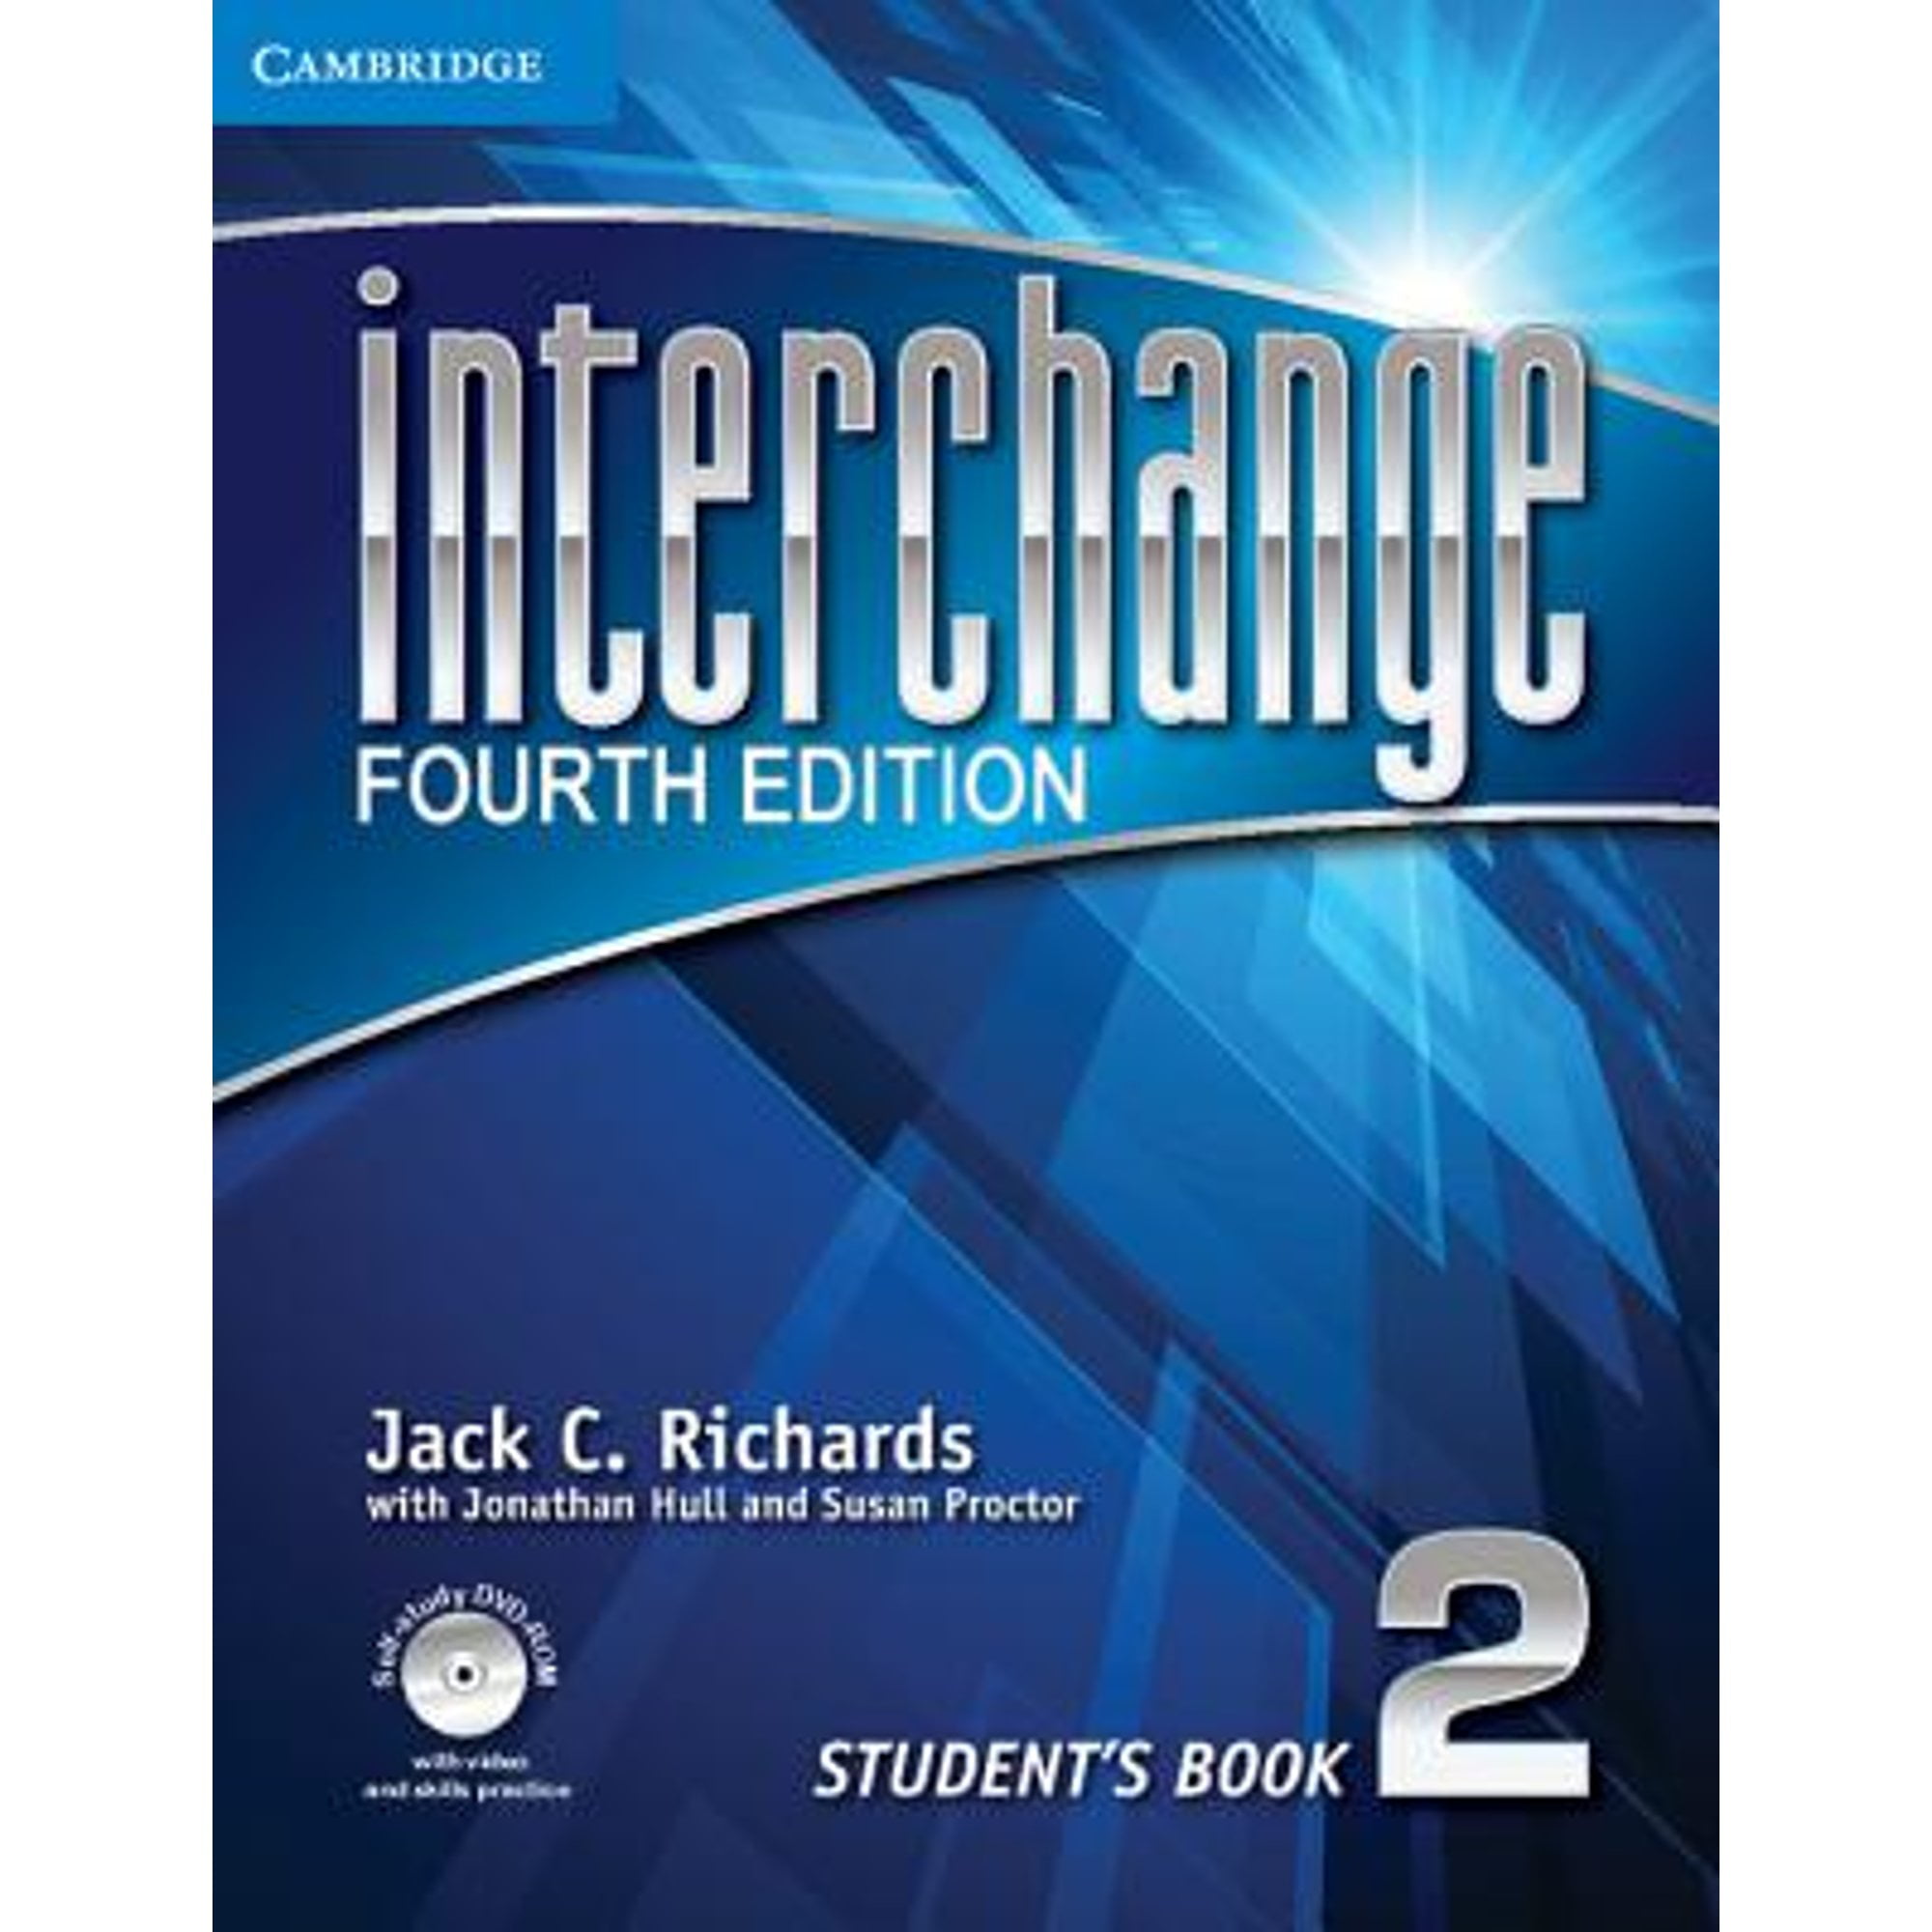 Pre-Owned Interchange Level 2 Student's Book with Self-study DVD-ROM (Paperback 9781107648692) by Jack C. Richards, Jonathan Hull, Susan Proctor